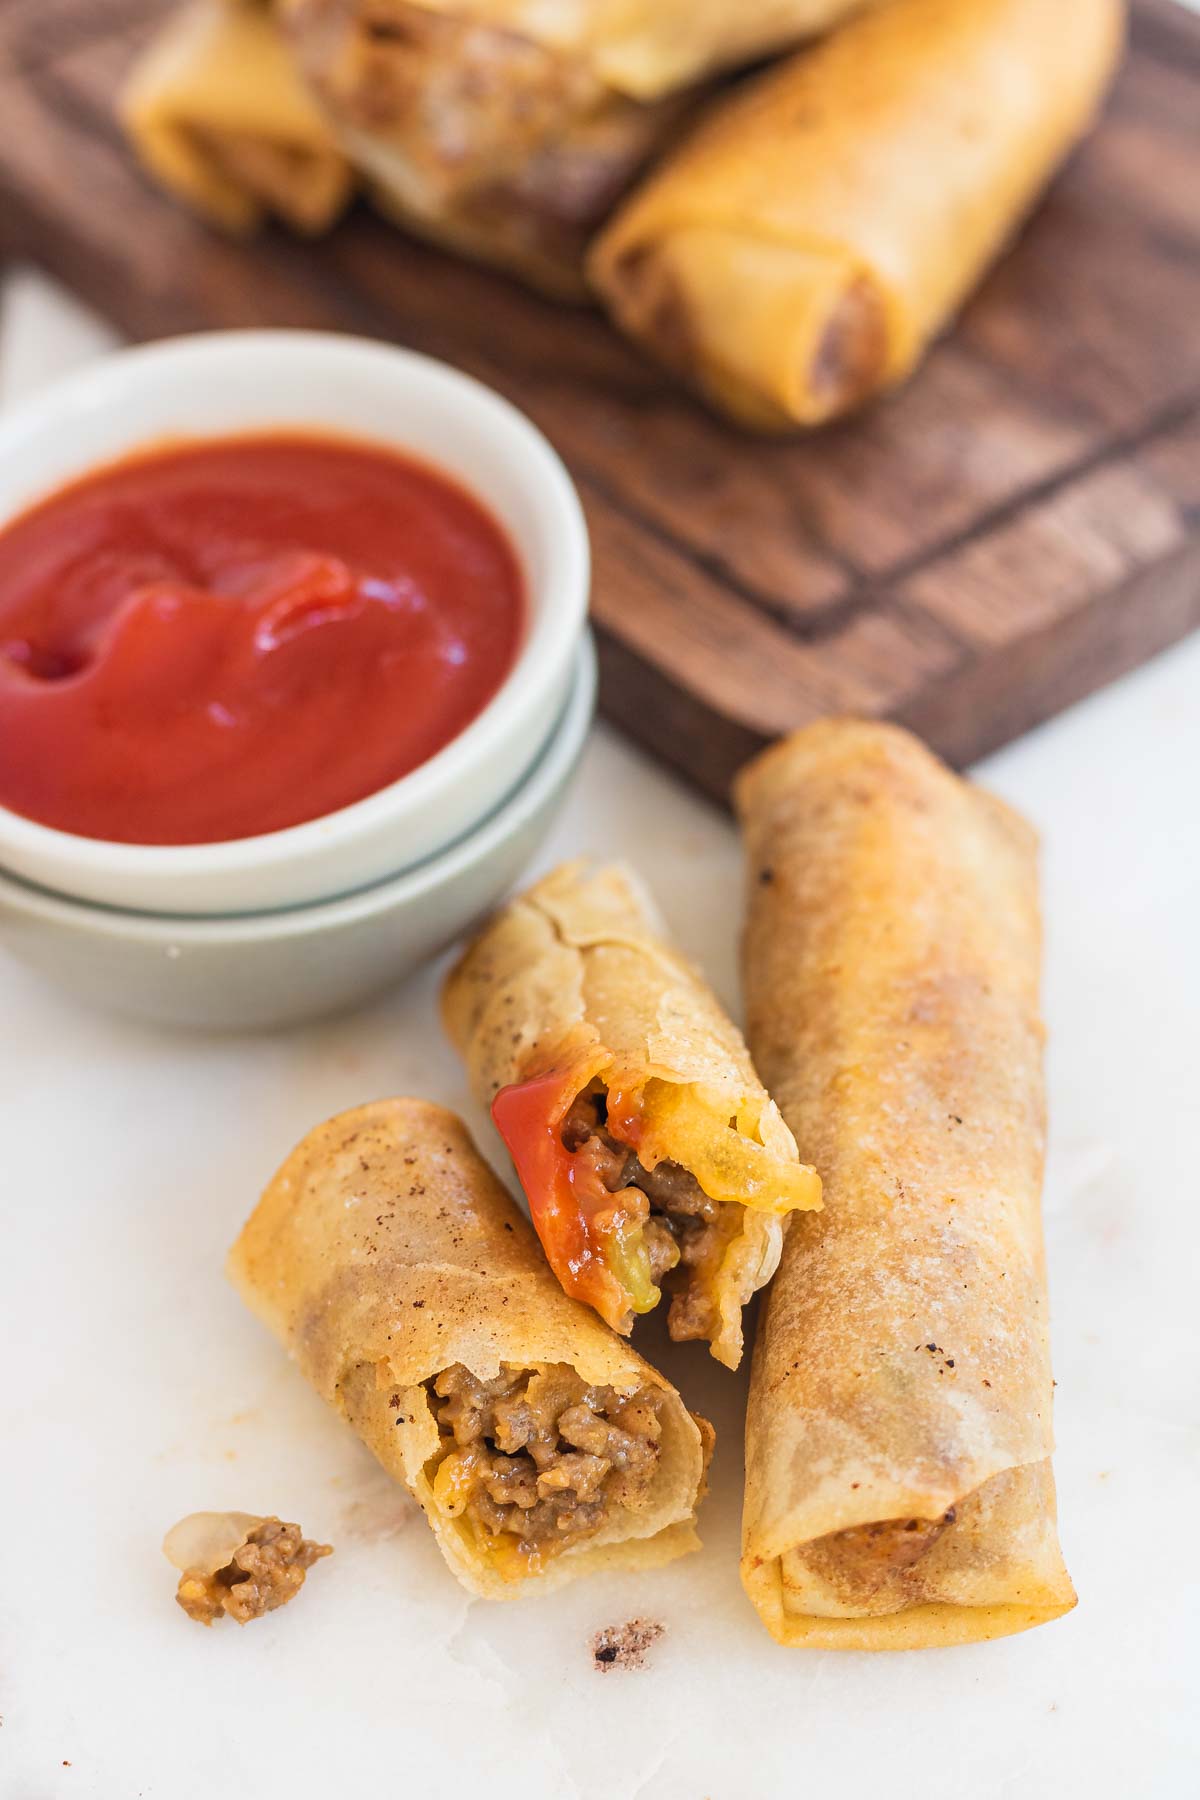 Cheeseburger spring rolls cut in half to show the filling.